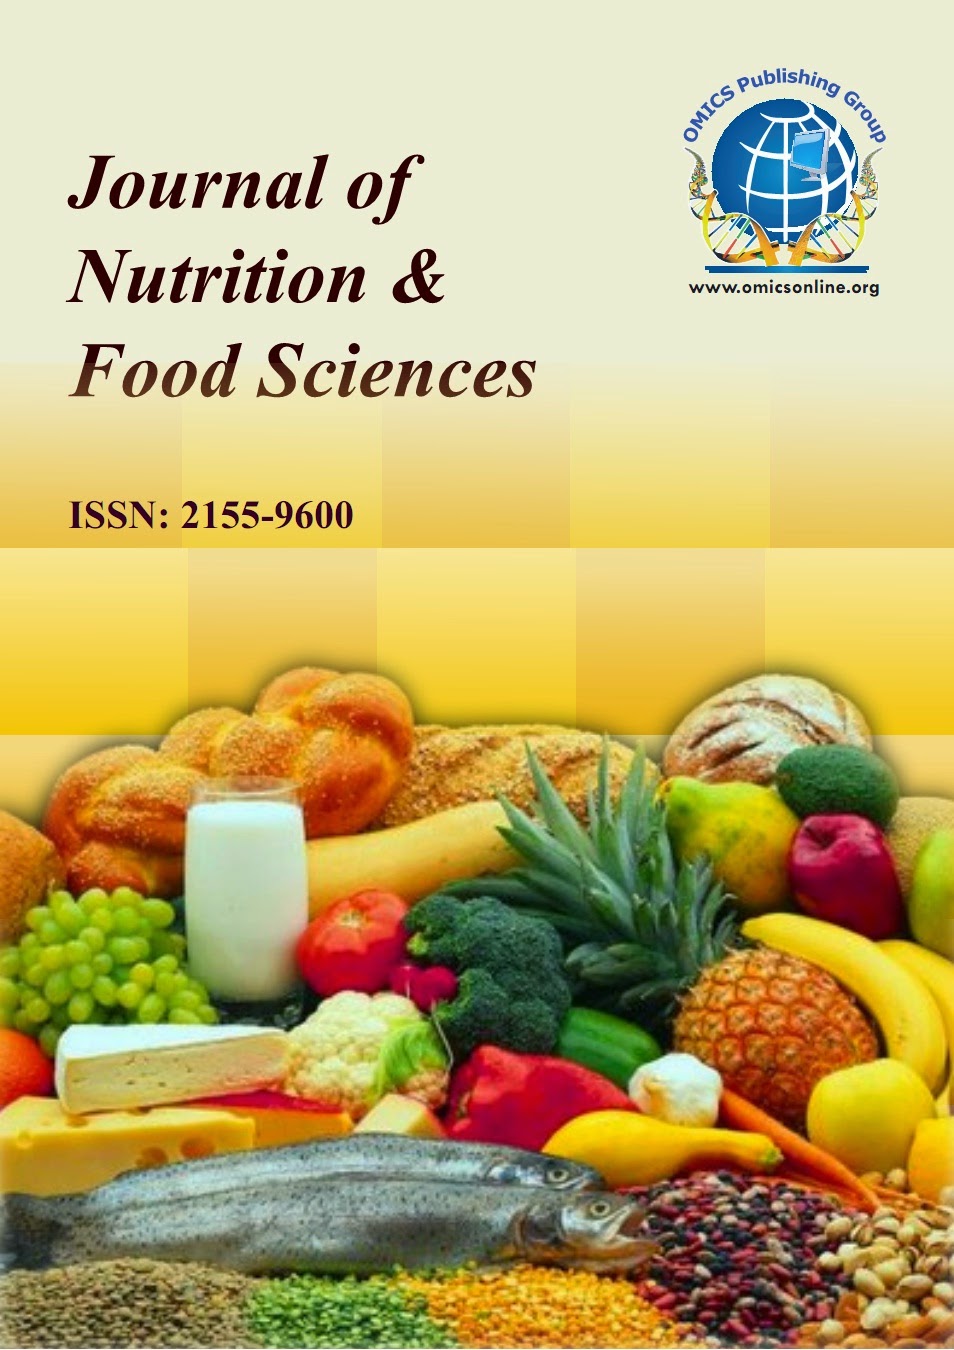 research topics on nutrition and health